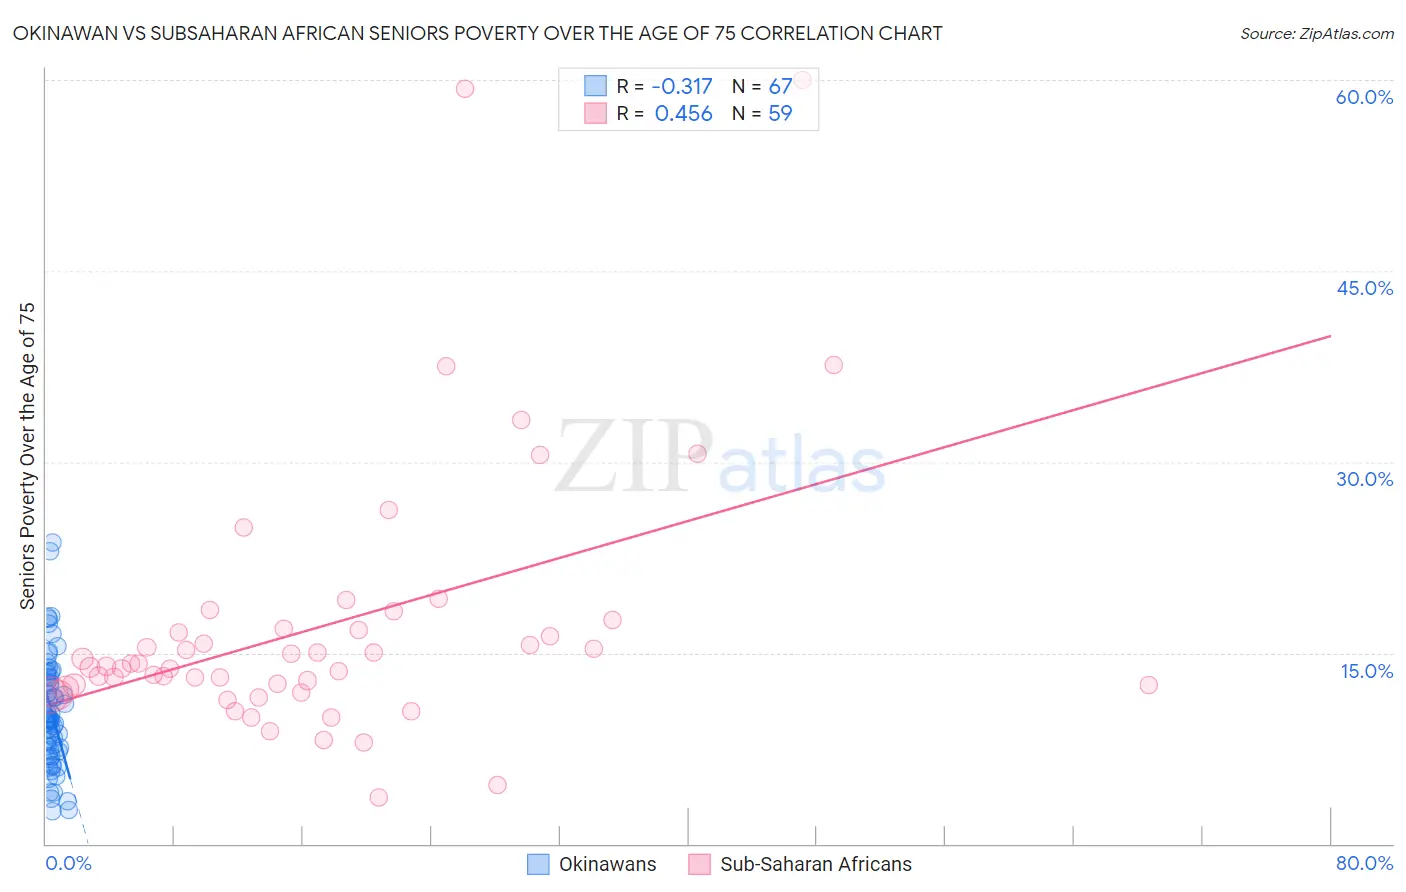 Okinawan vs Subsaharan African Seniors Poverty Over the Age of 75